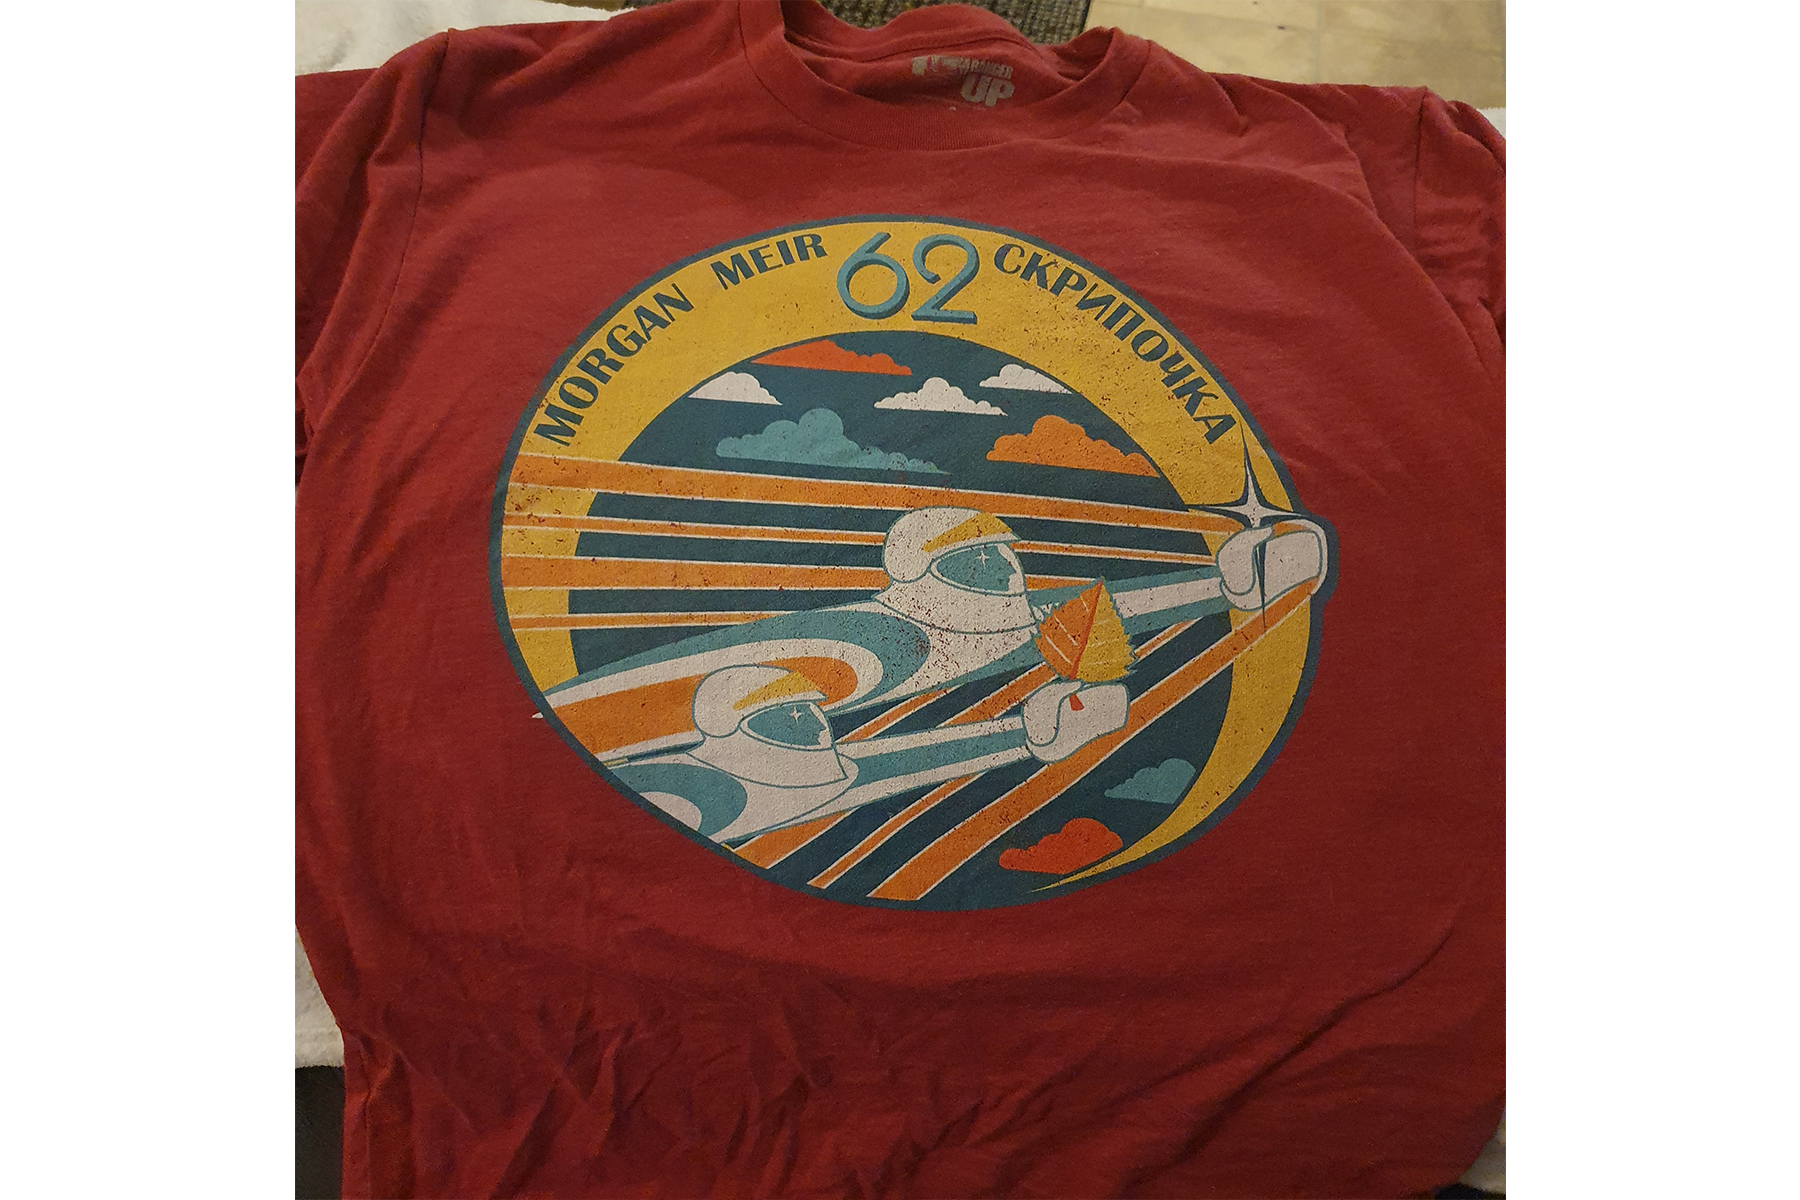 A red T-shirt with a graphic  of astronauts appearing as if they are flying on it